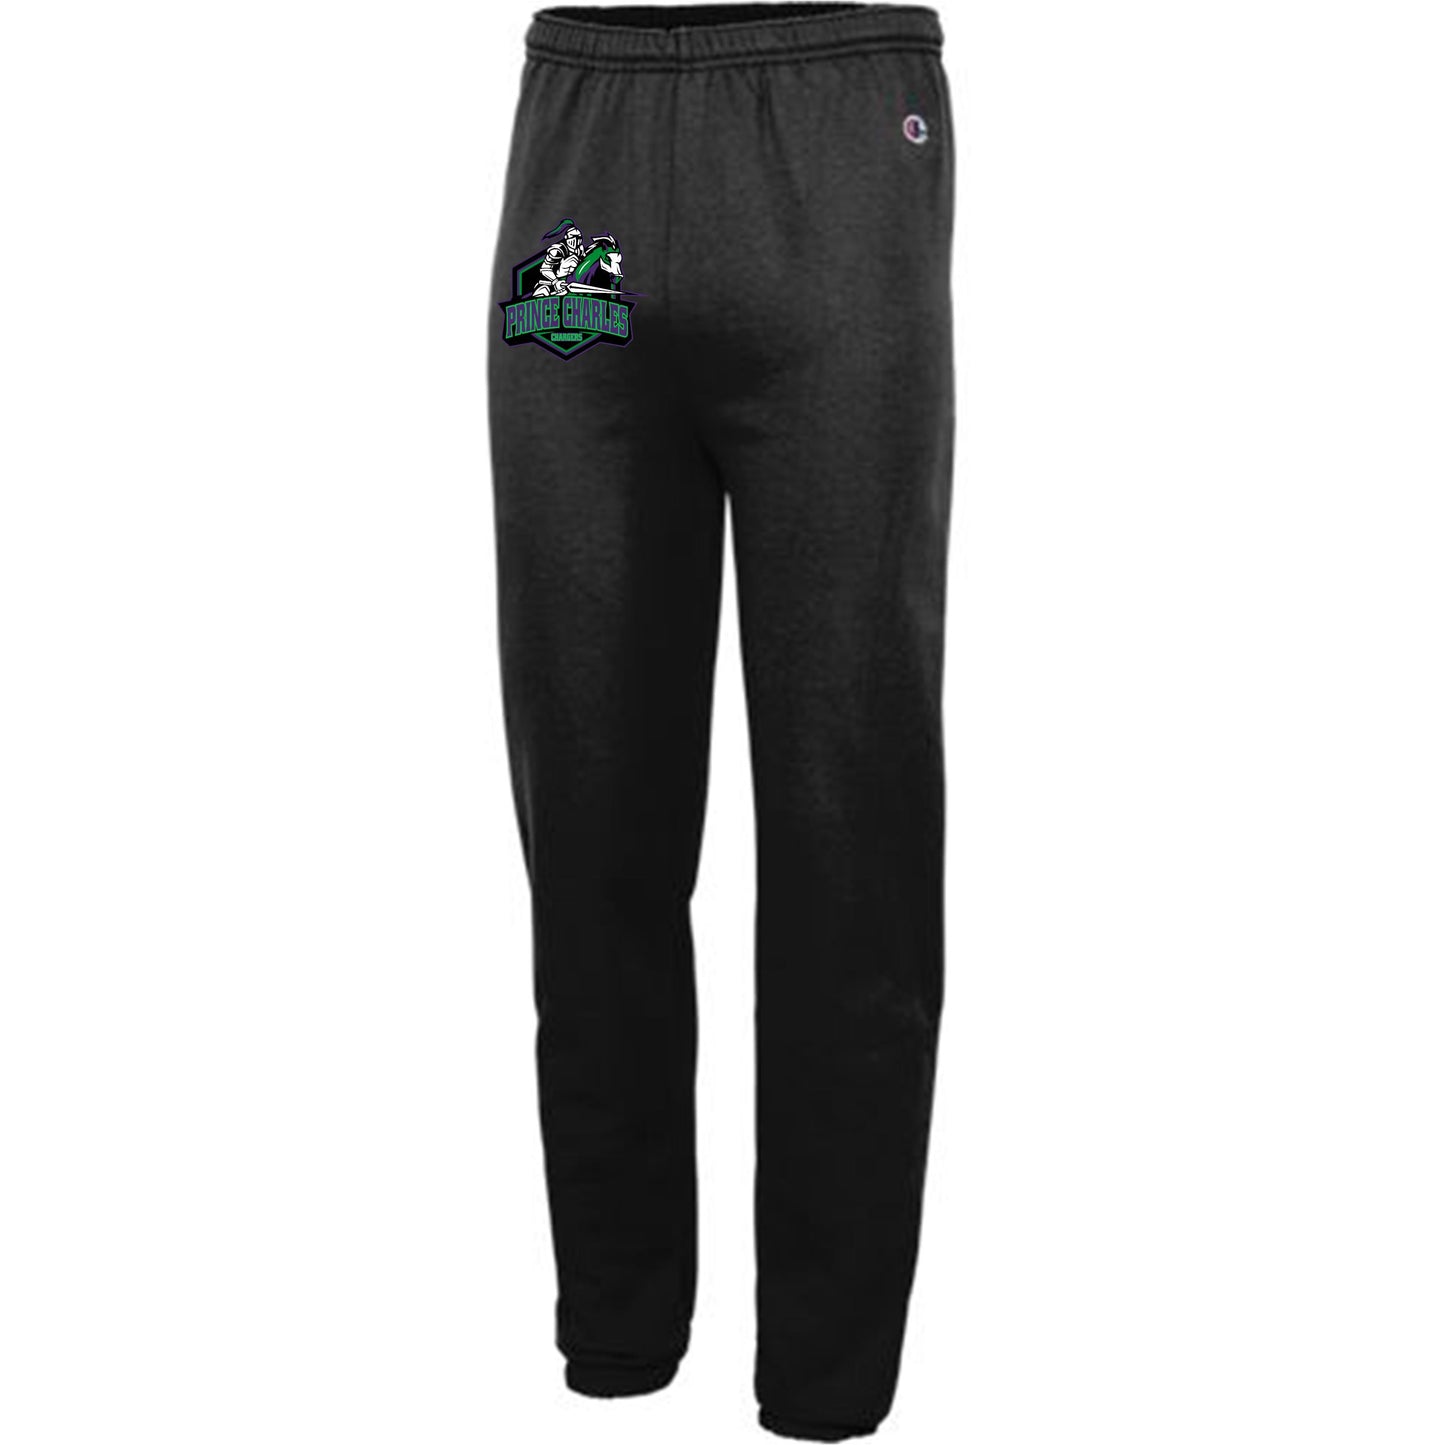 Prince Charles Chargers Adult Champion Sweat Pants